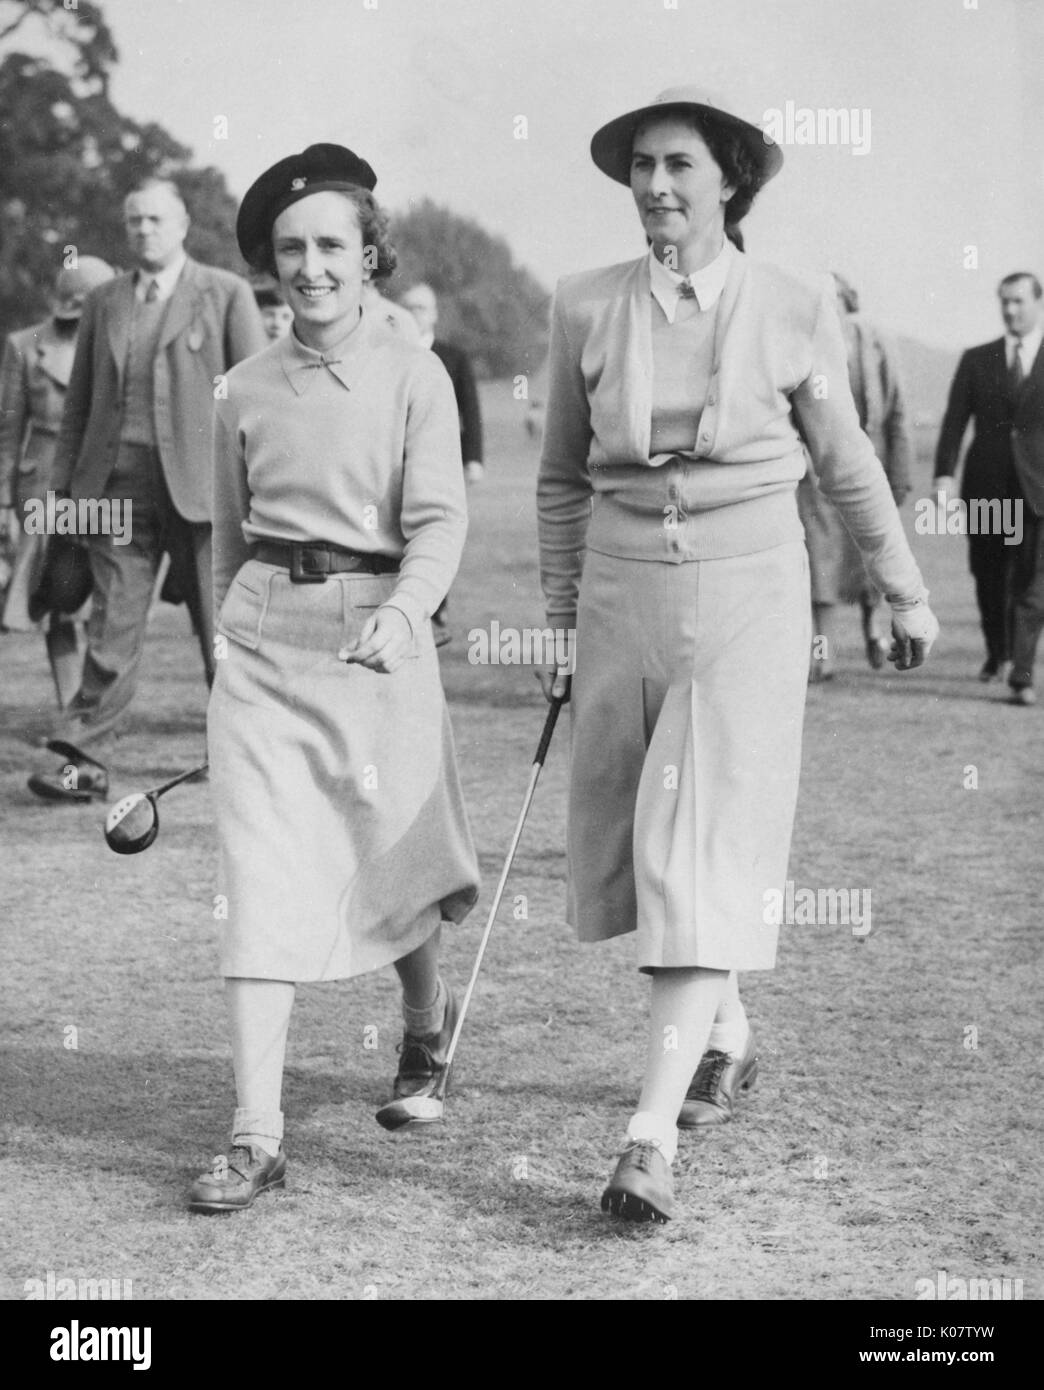 Two women golfers on a golf course Stock Photo